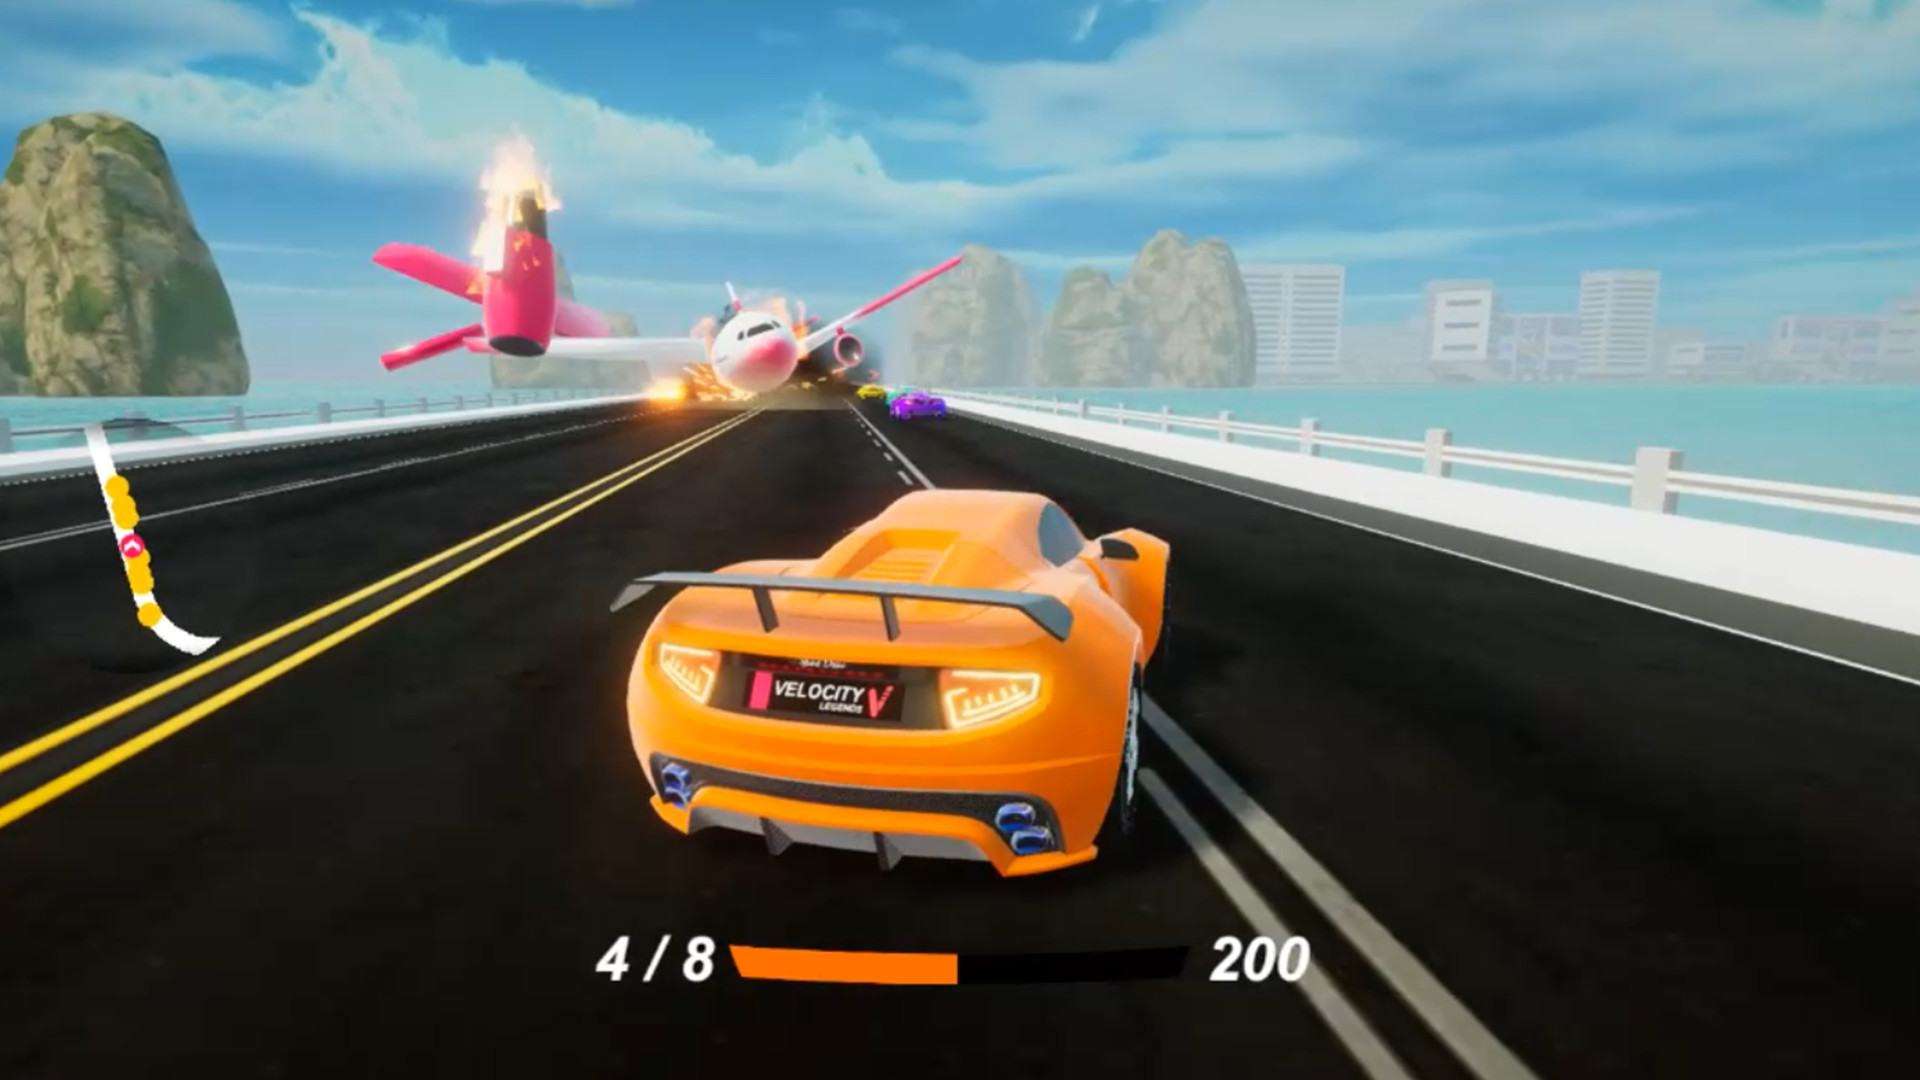 Steam Community :: Velocity Legends - Crazy Car Action Racing Game